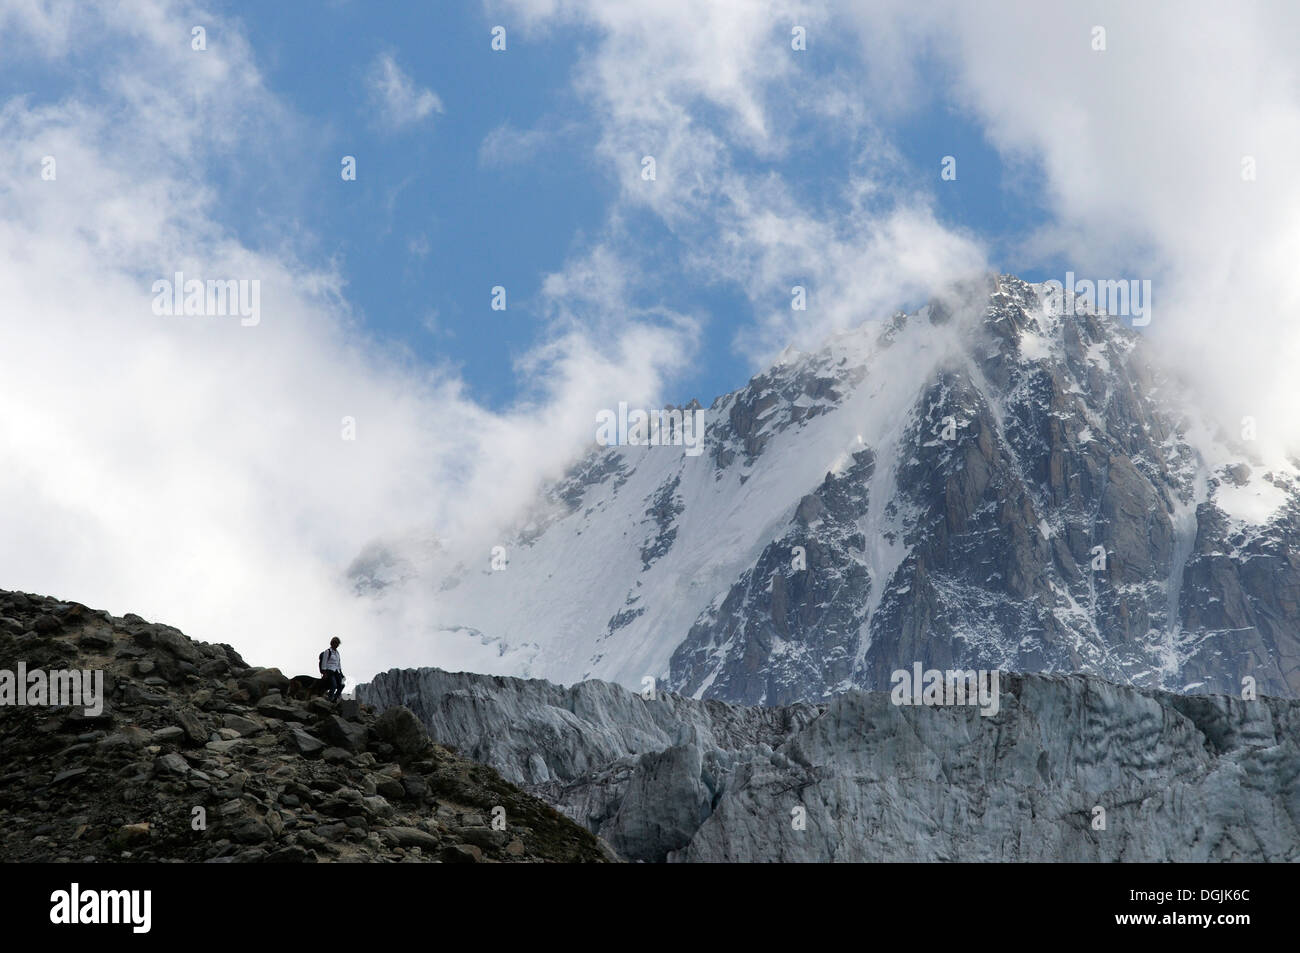 A walker descending  a path in the french alps with the Aiguille de Chardonnet behind Stock Photo